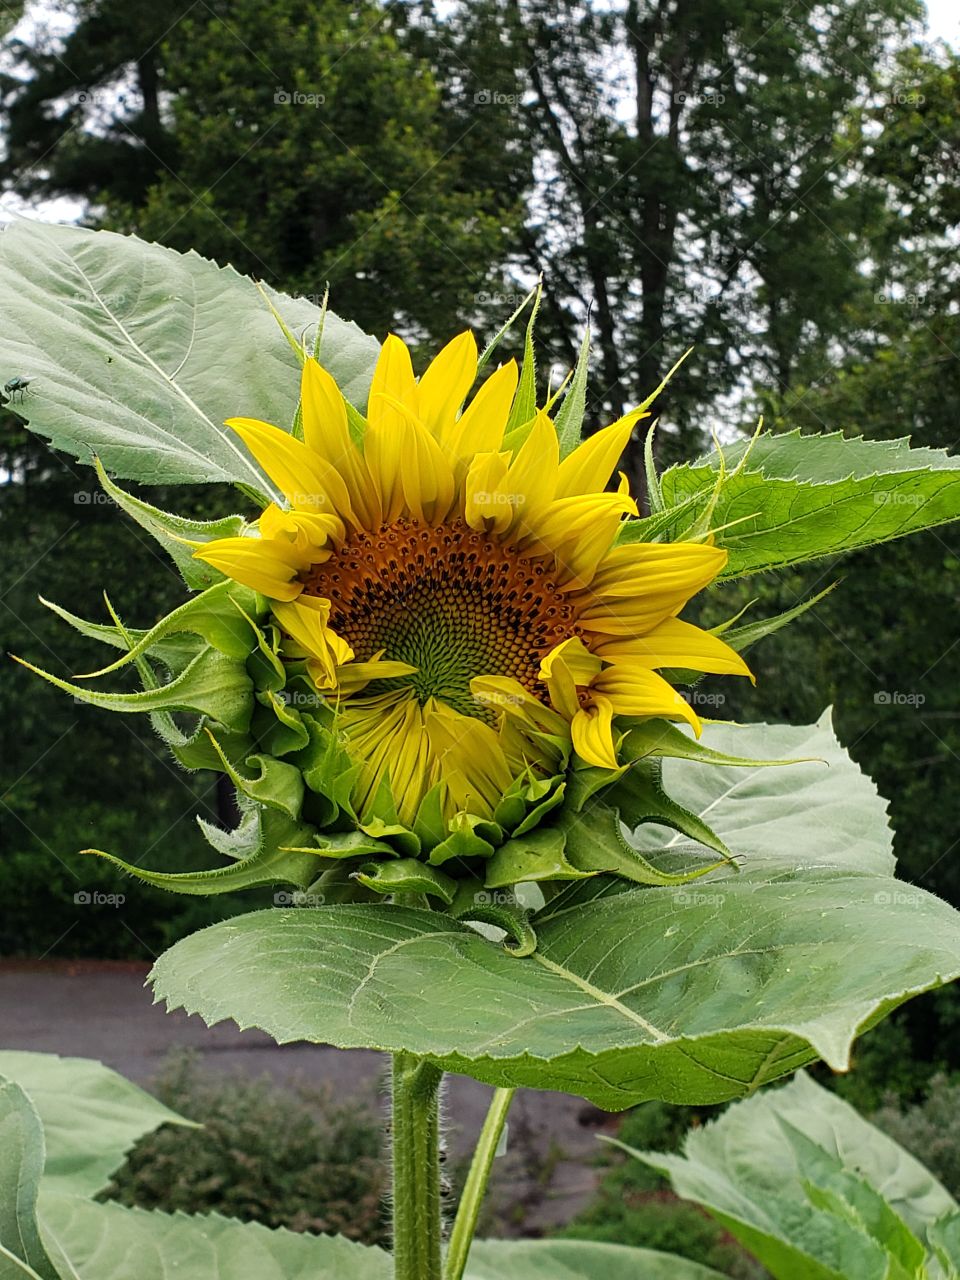 My sunflowers are blooming